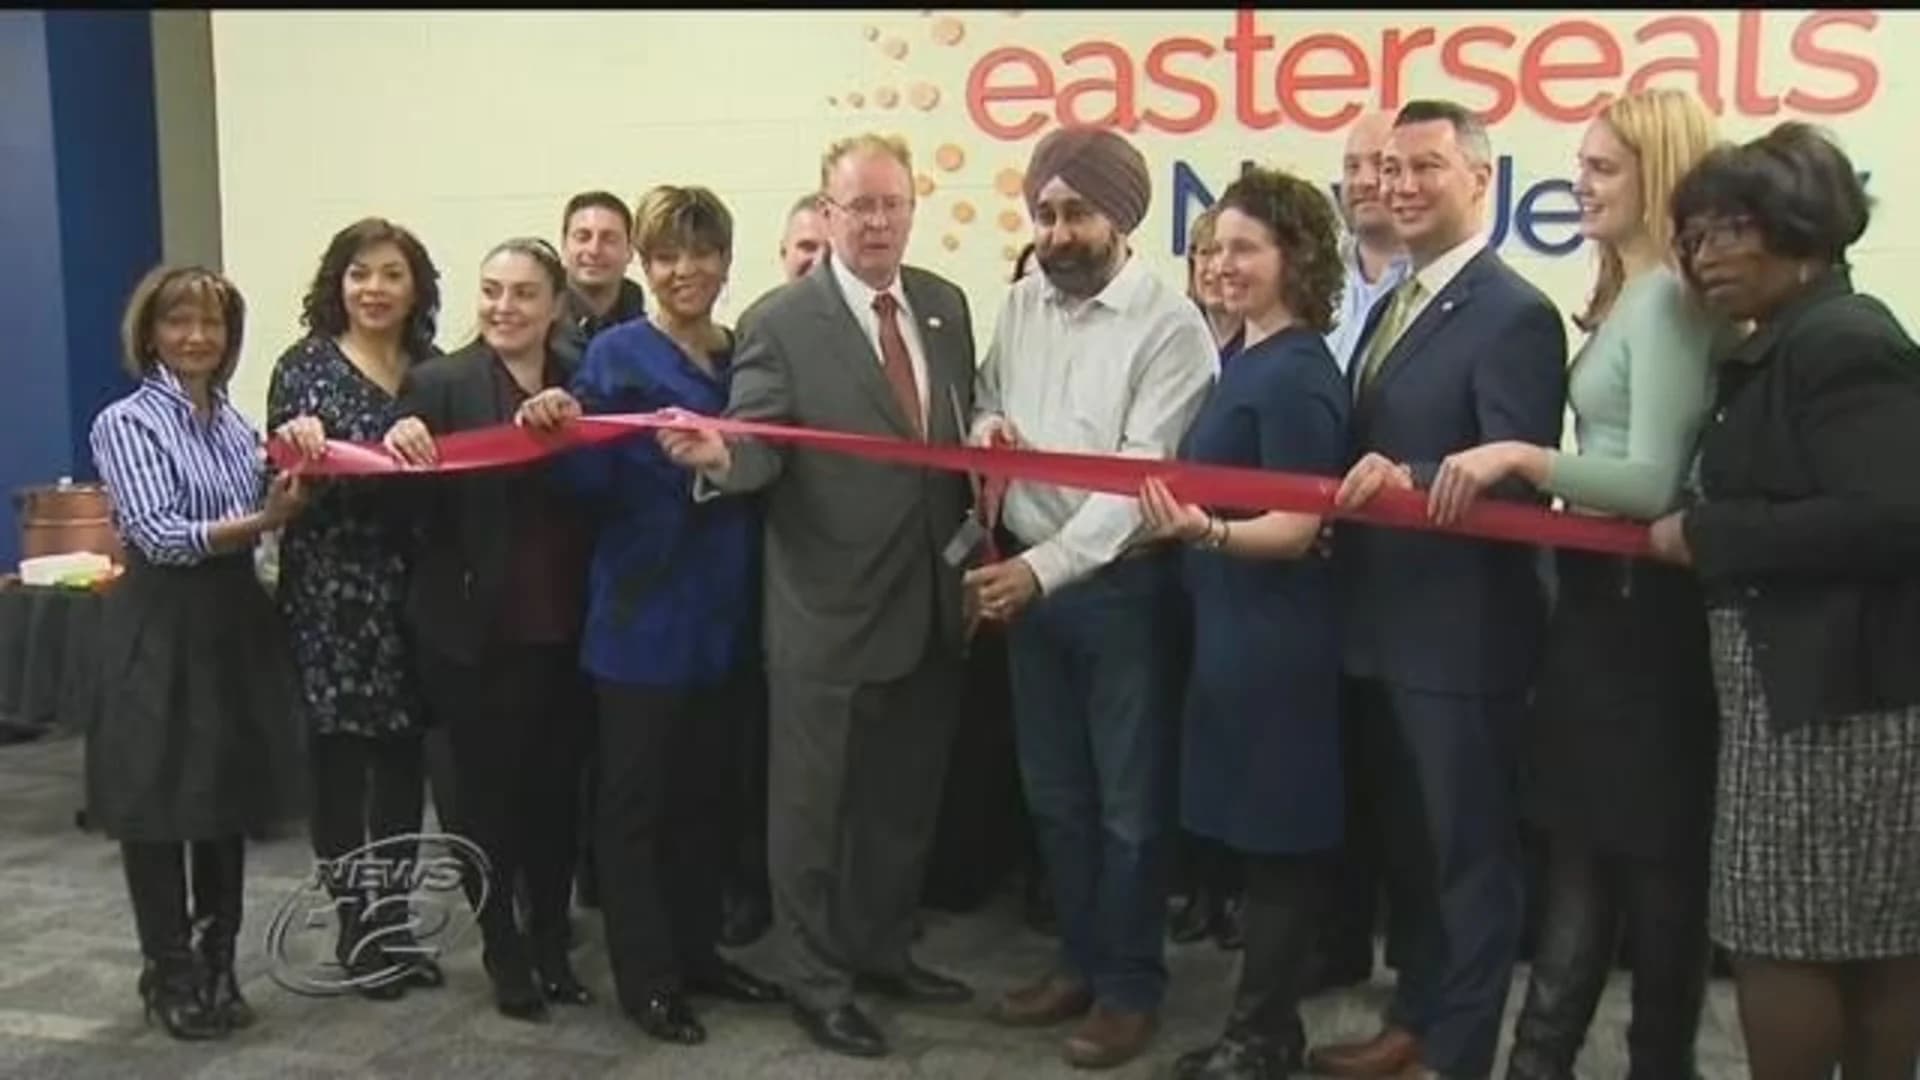 Easterseals cuts ribbon on new facility in Hoboken